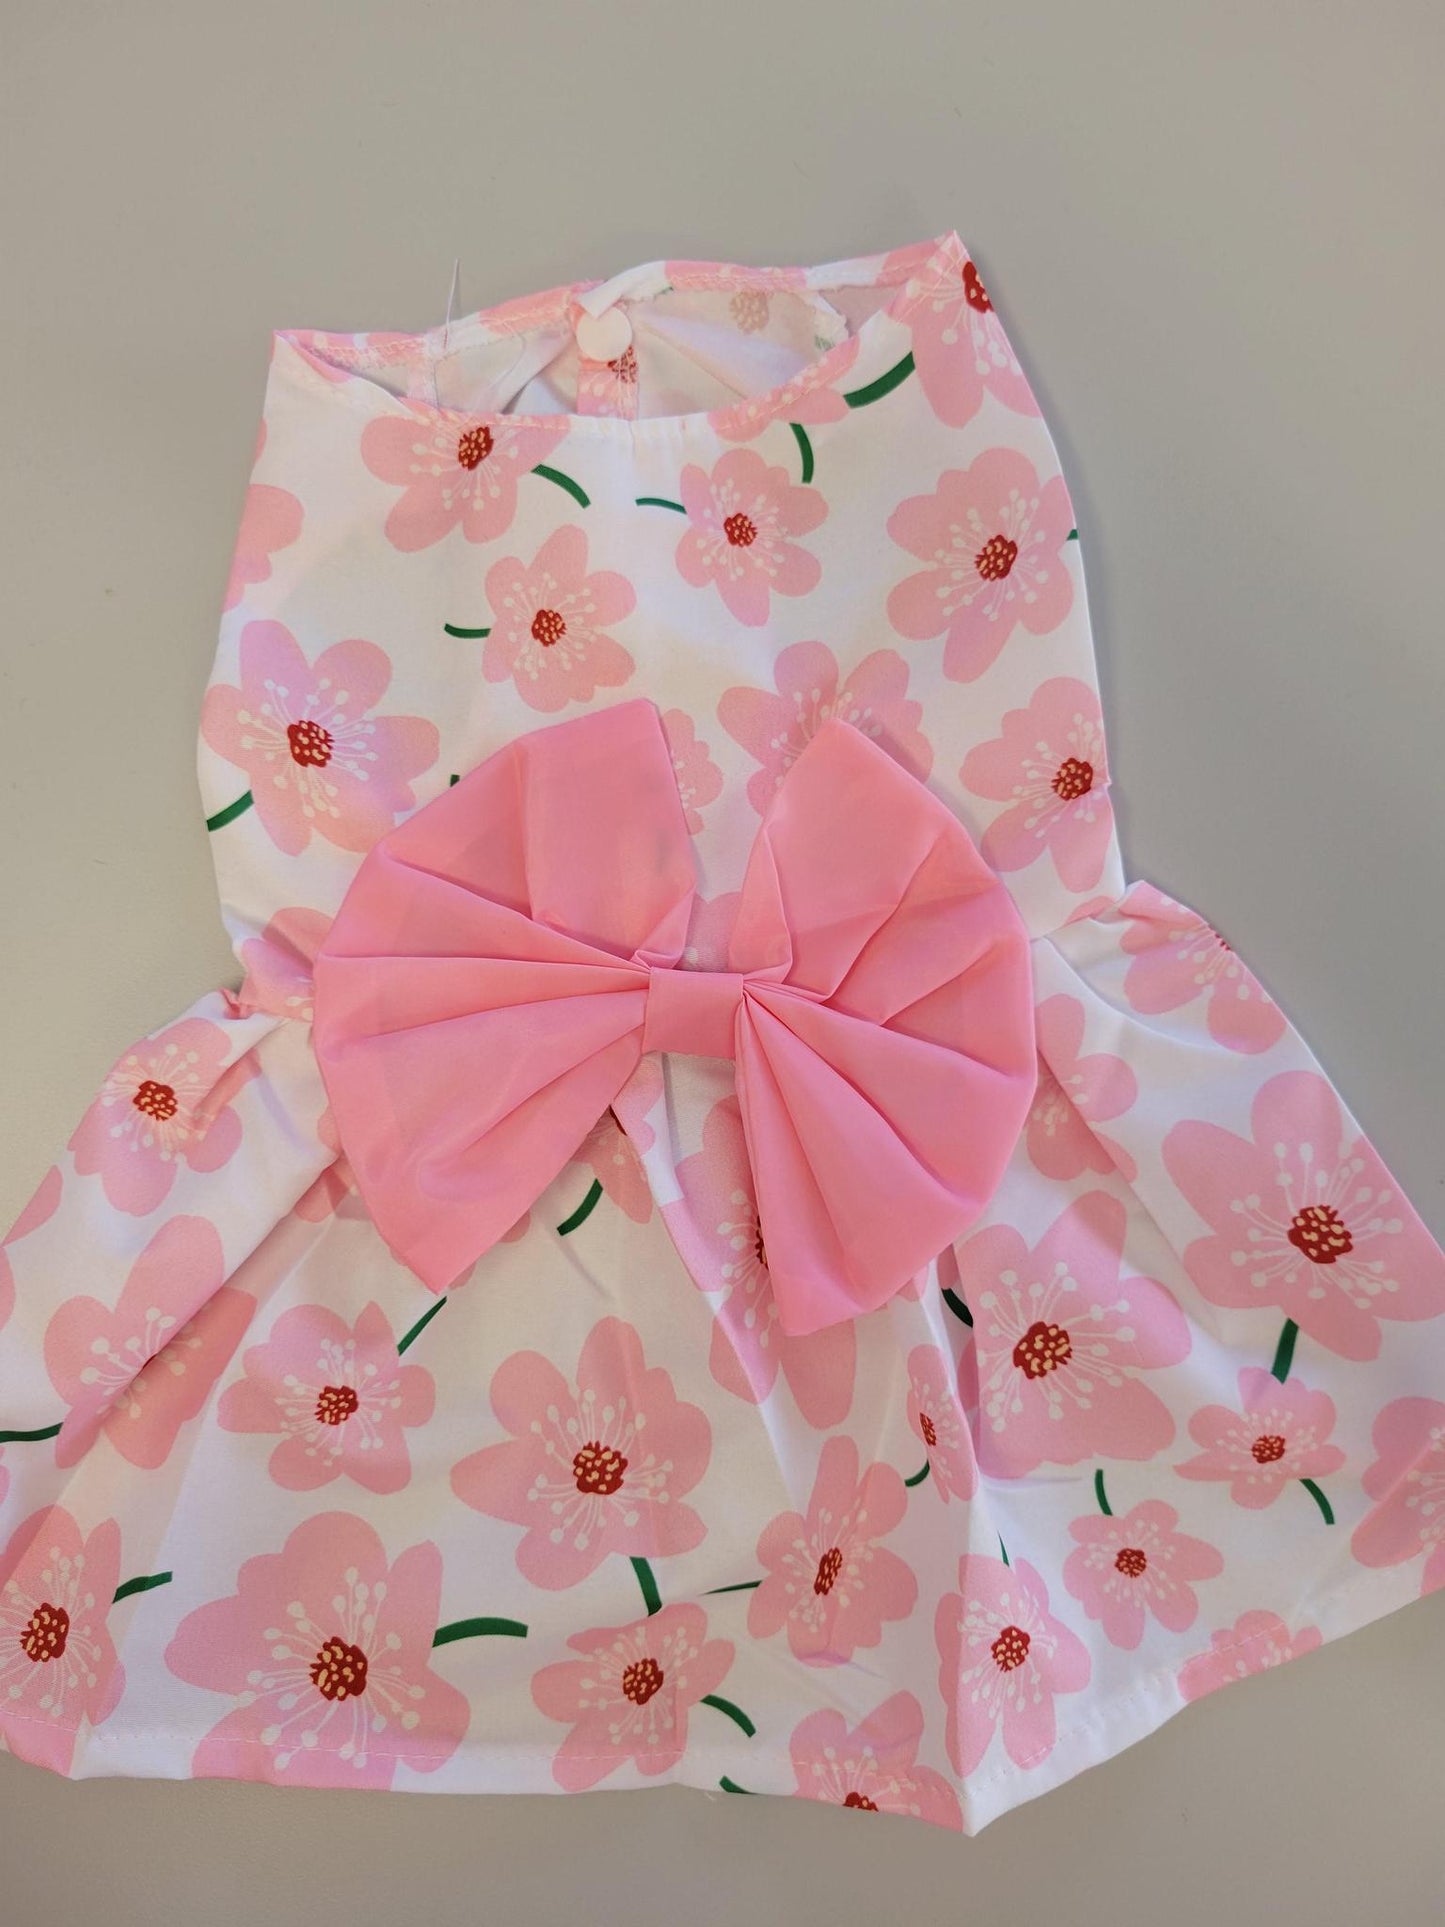 Floral dress with pink flowers with a pink bow